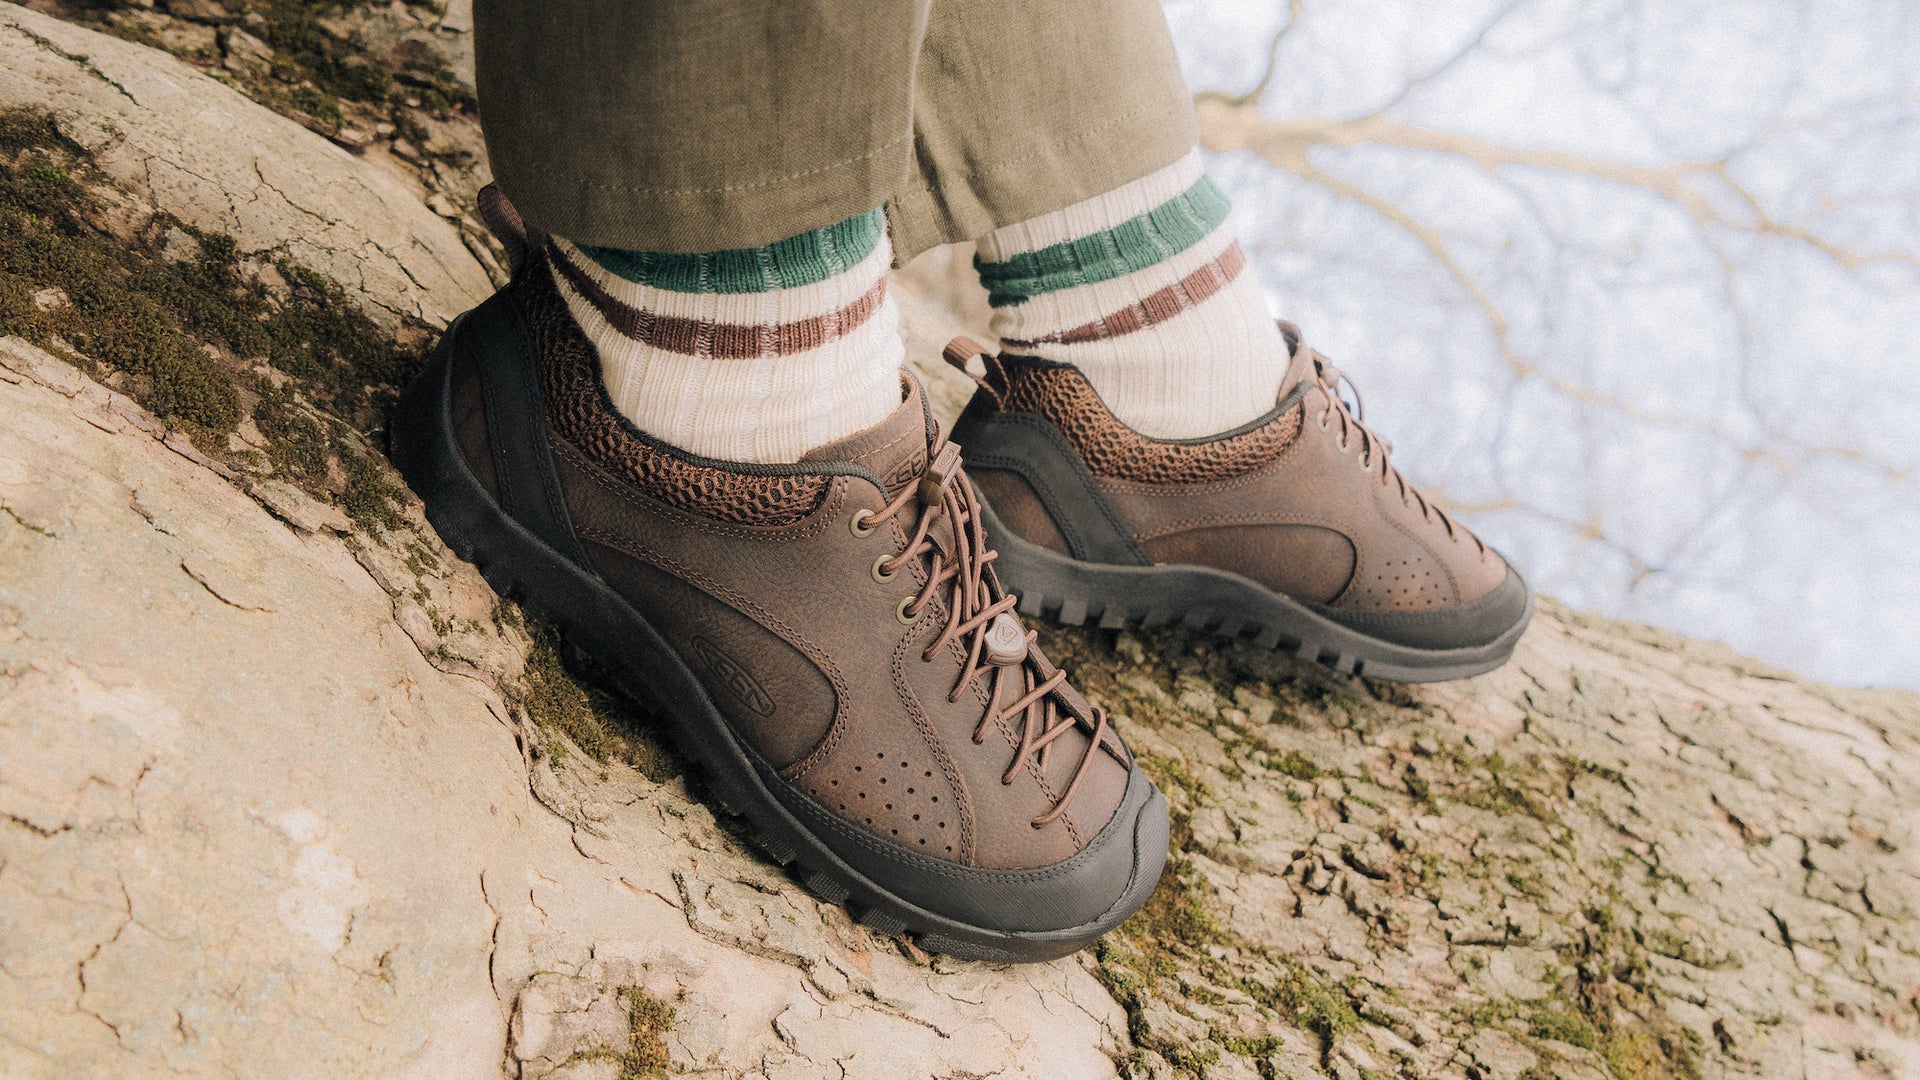 Keen: Two Feet in the Great Outdoors